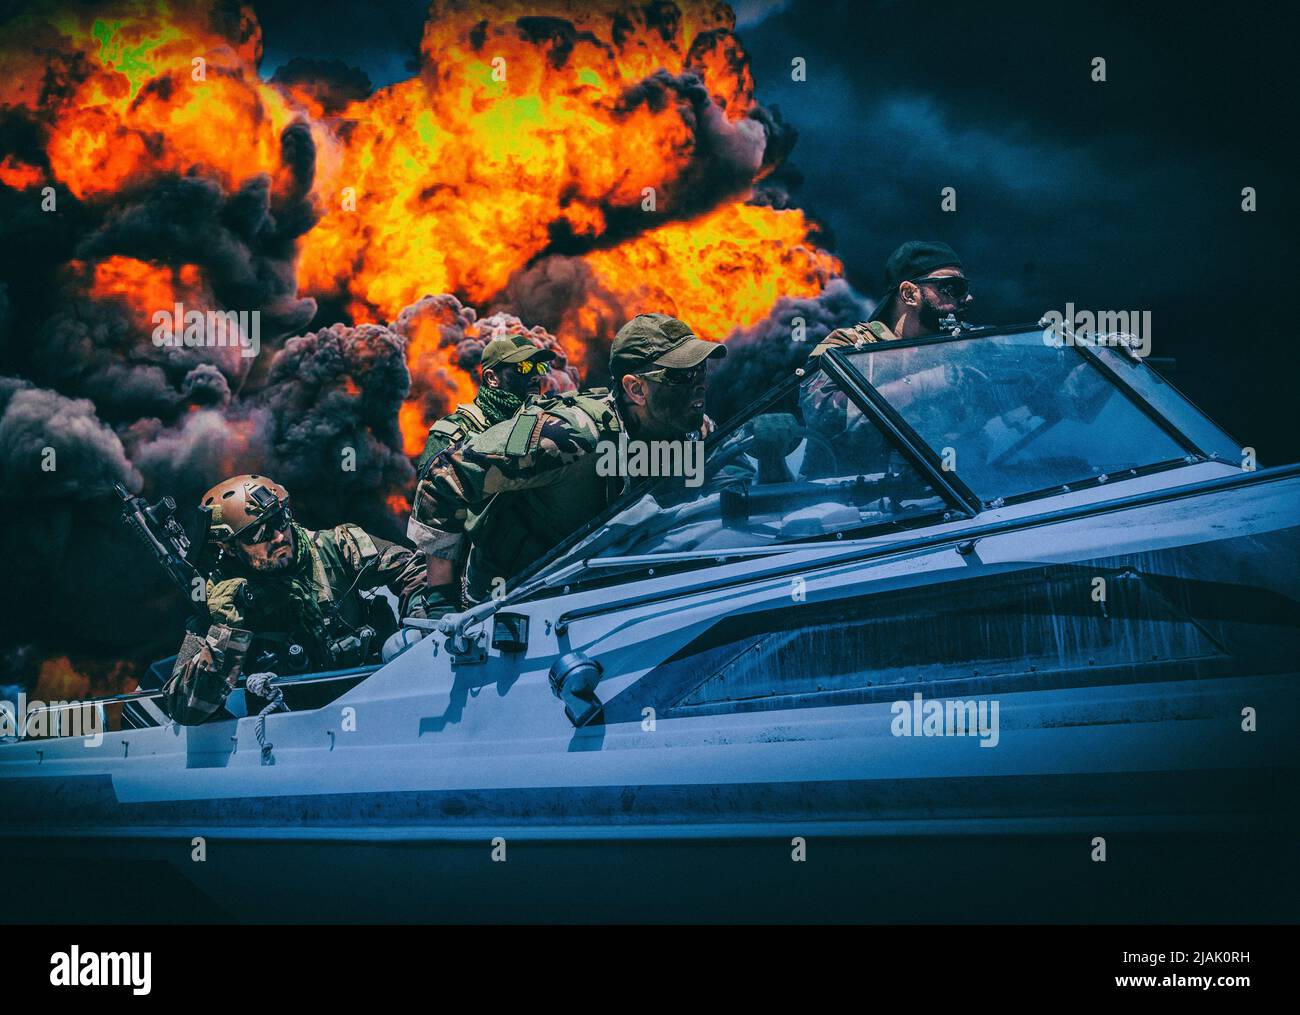 Navy SEALs breaking through enemy fire on a boat, with black smoke in background. Stock Photo